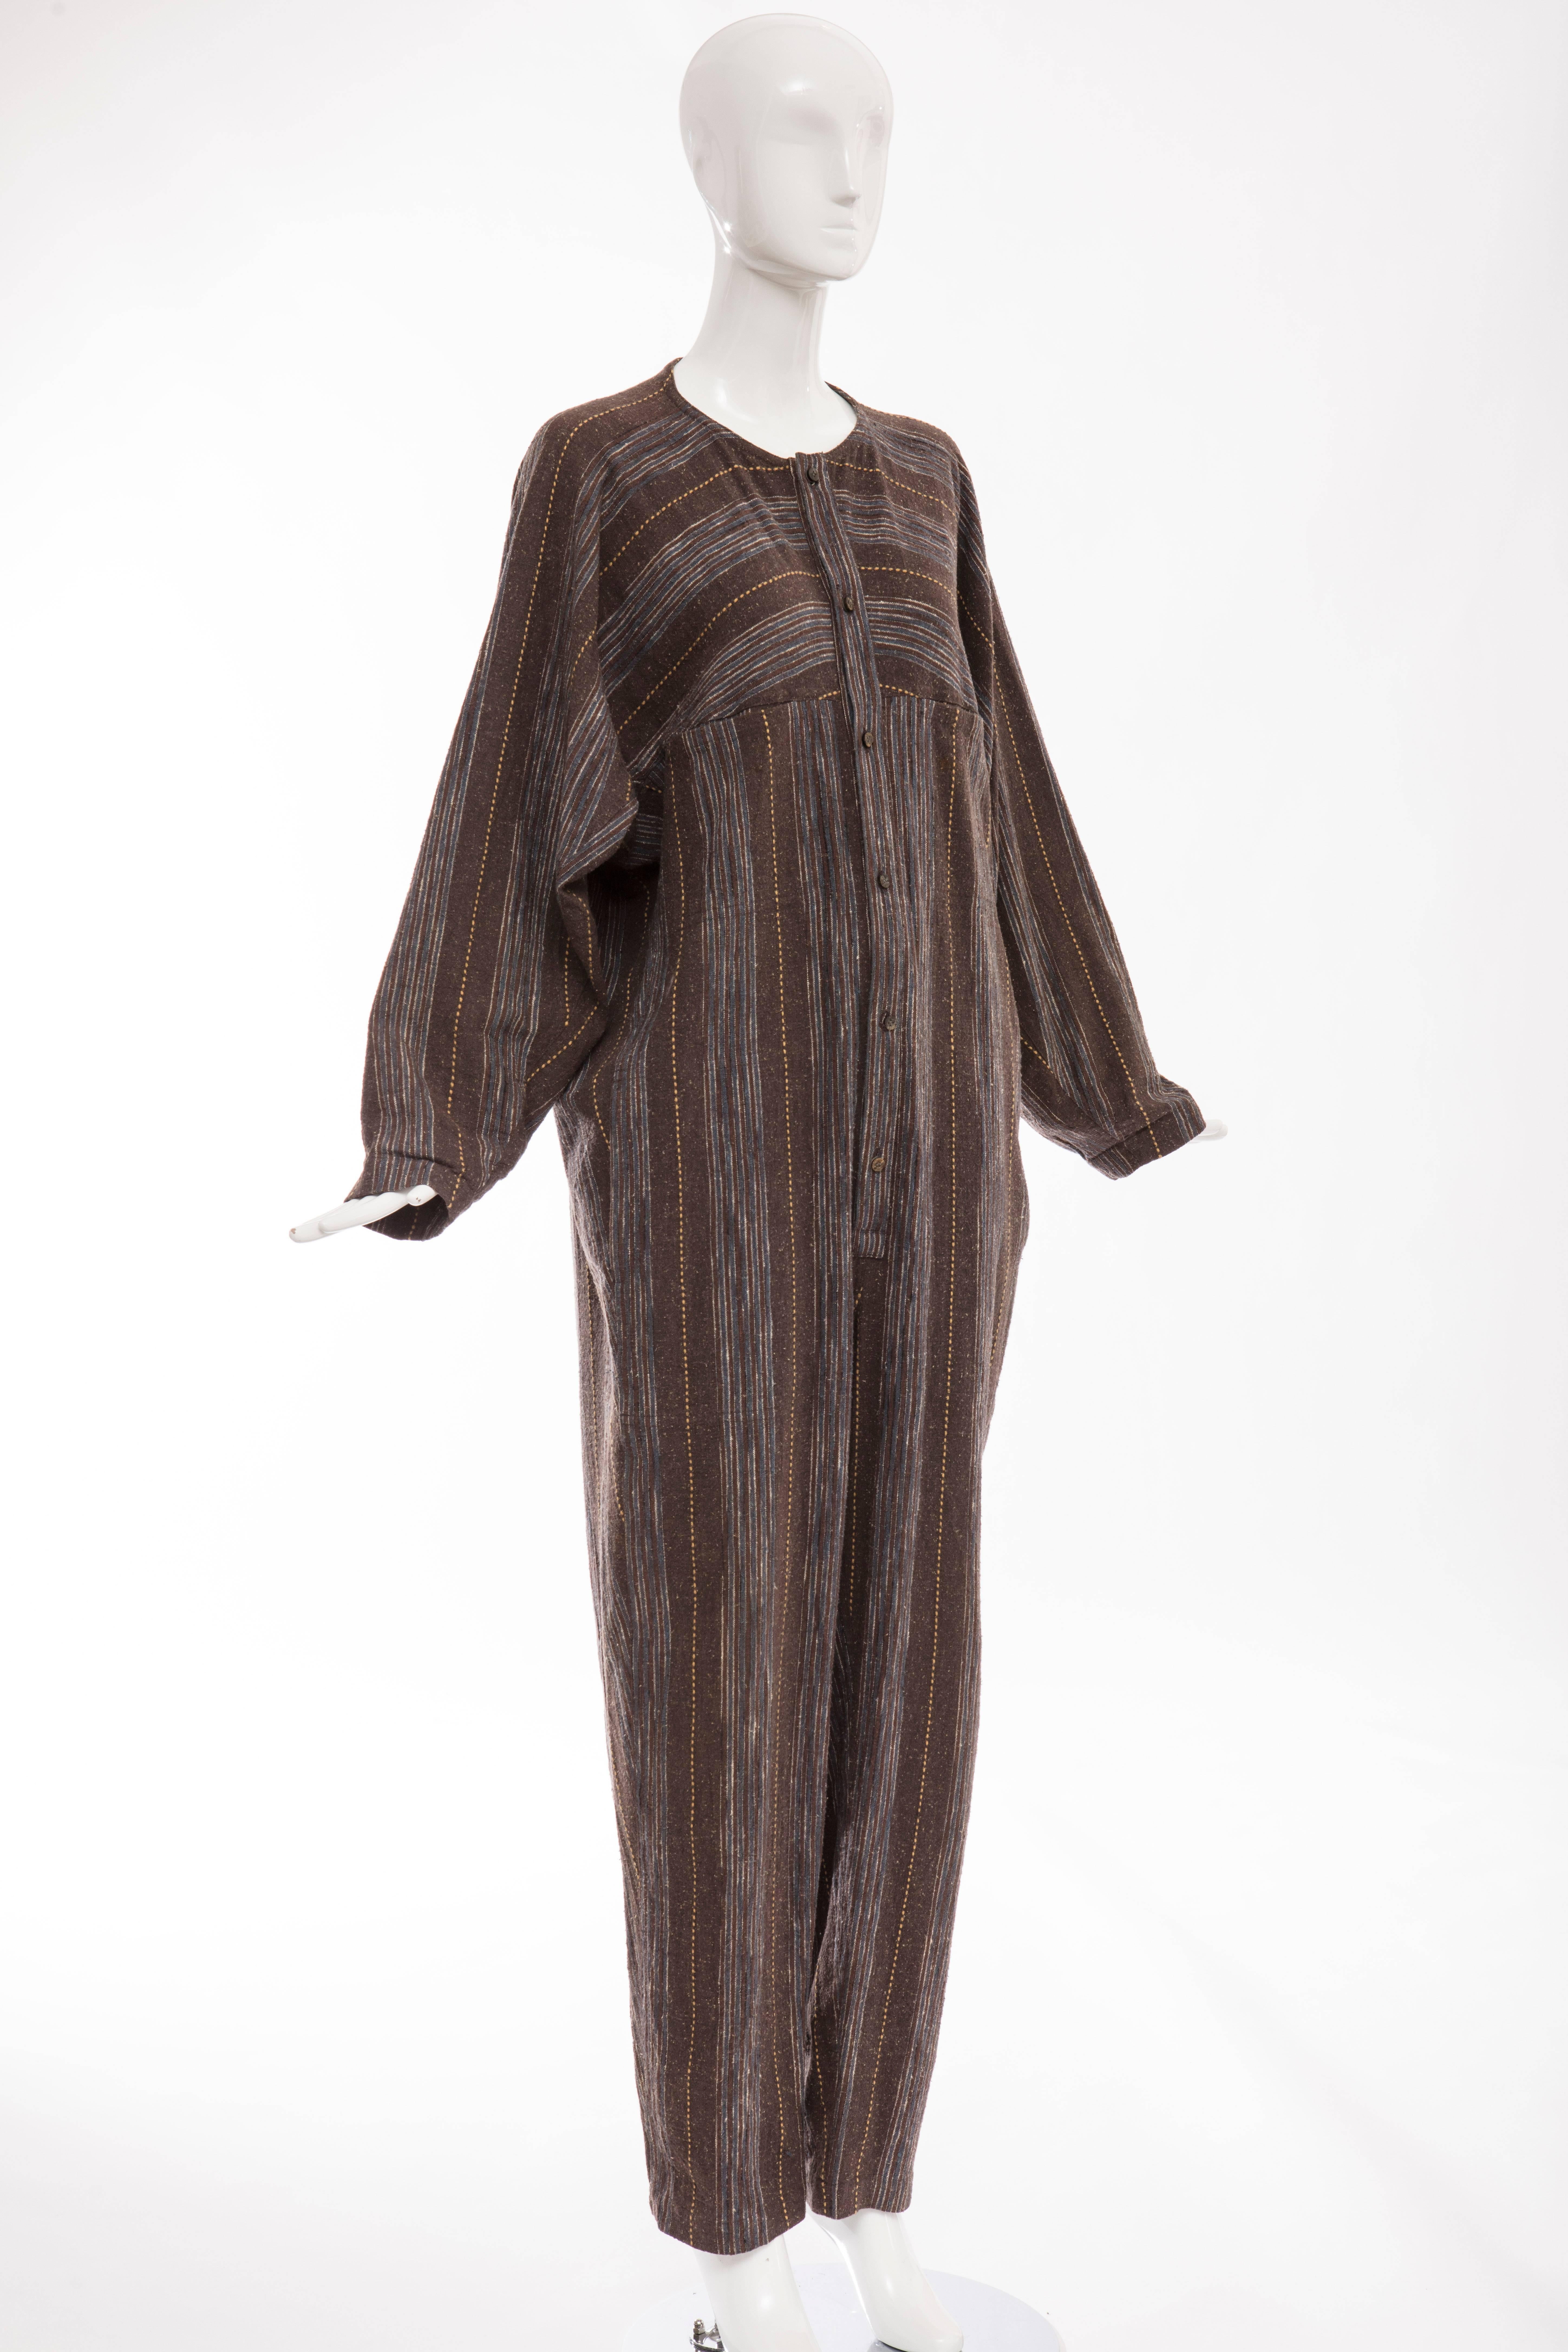 Black Issey Miyake Plantation Striped Woven Cotton Jumpsuit, Circa 1980s For Sale